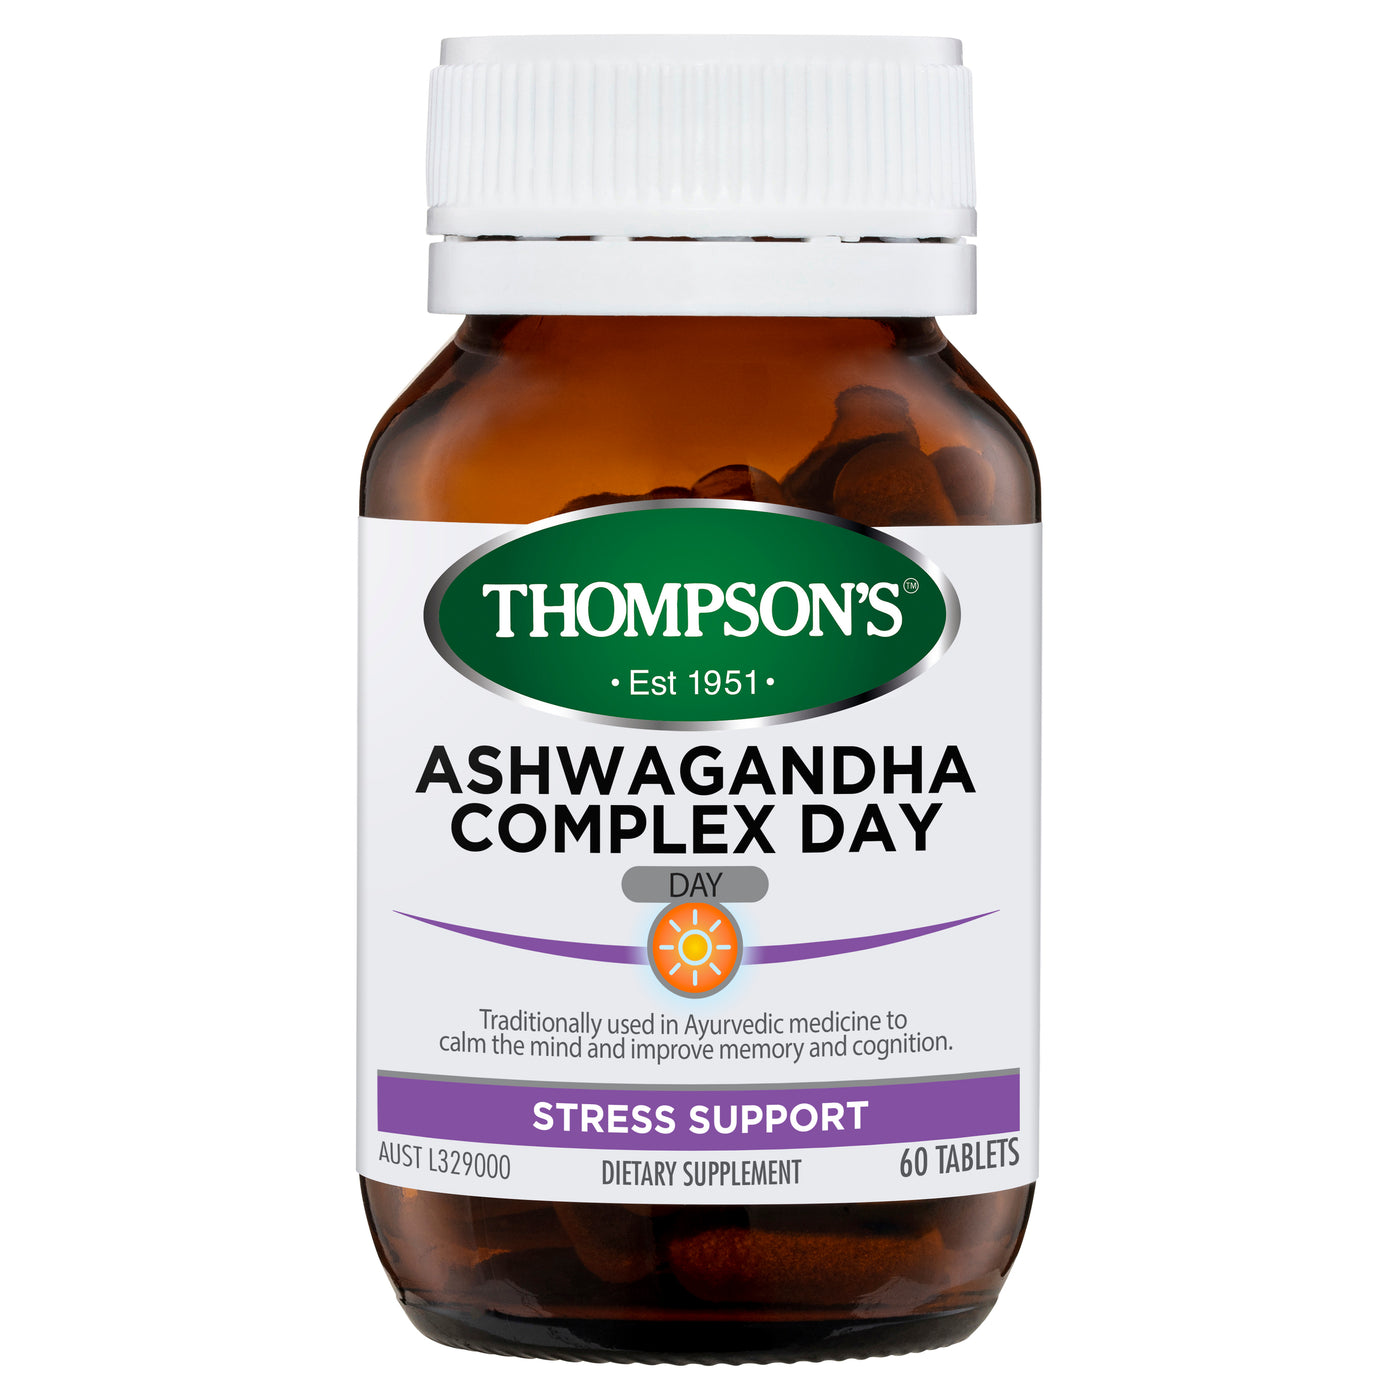 Thompsons Ashwagandha Complex Day Stress Support 60 tablets